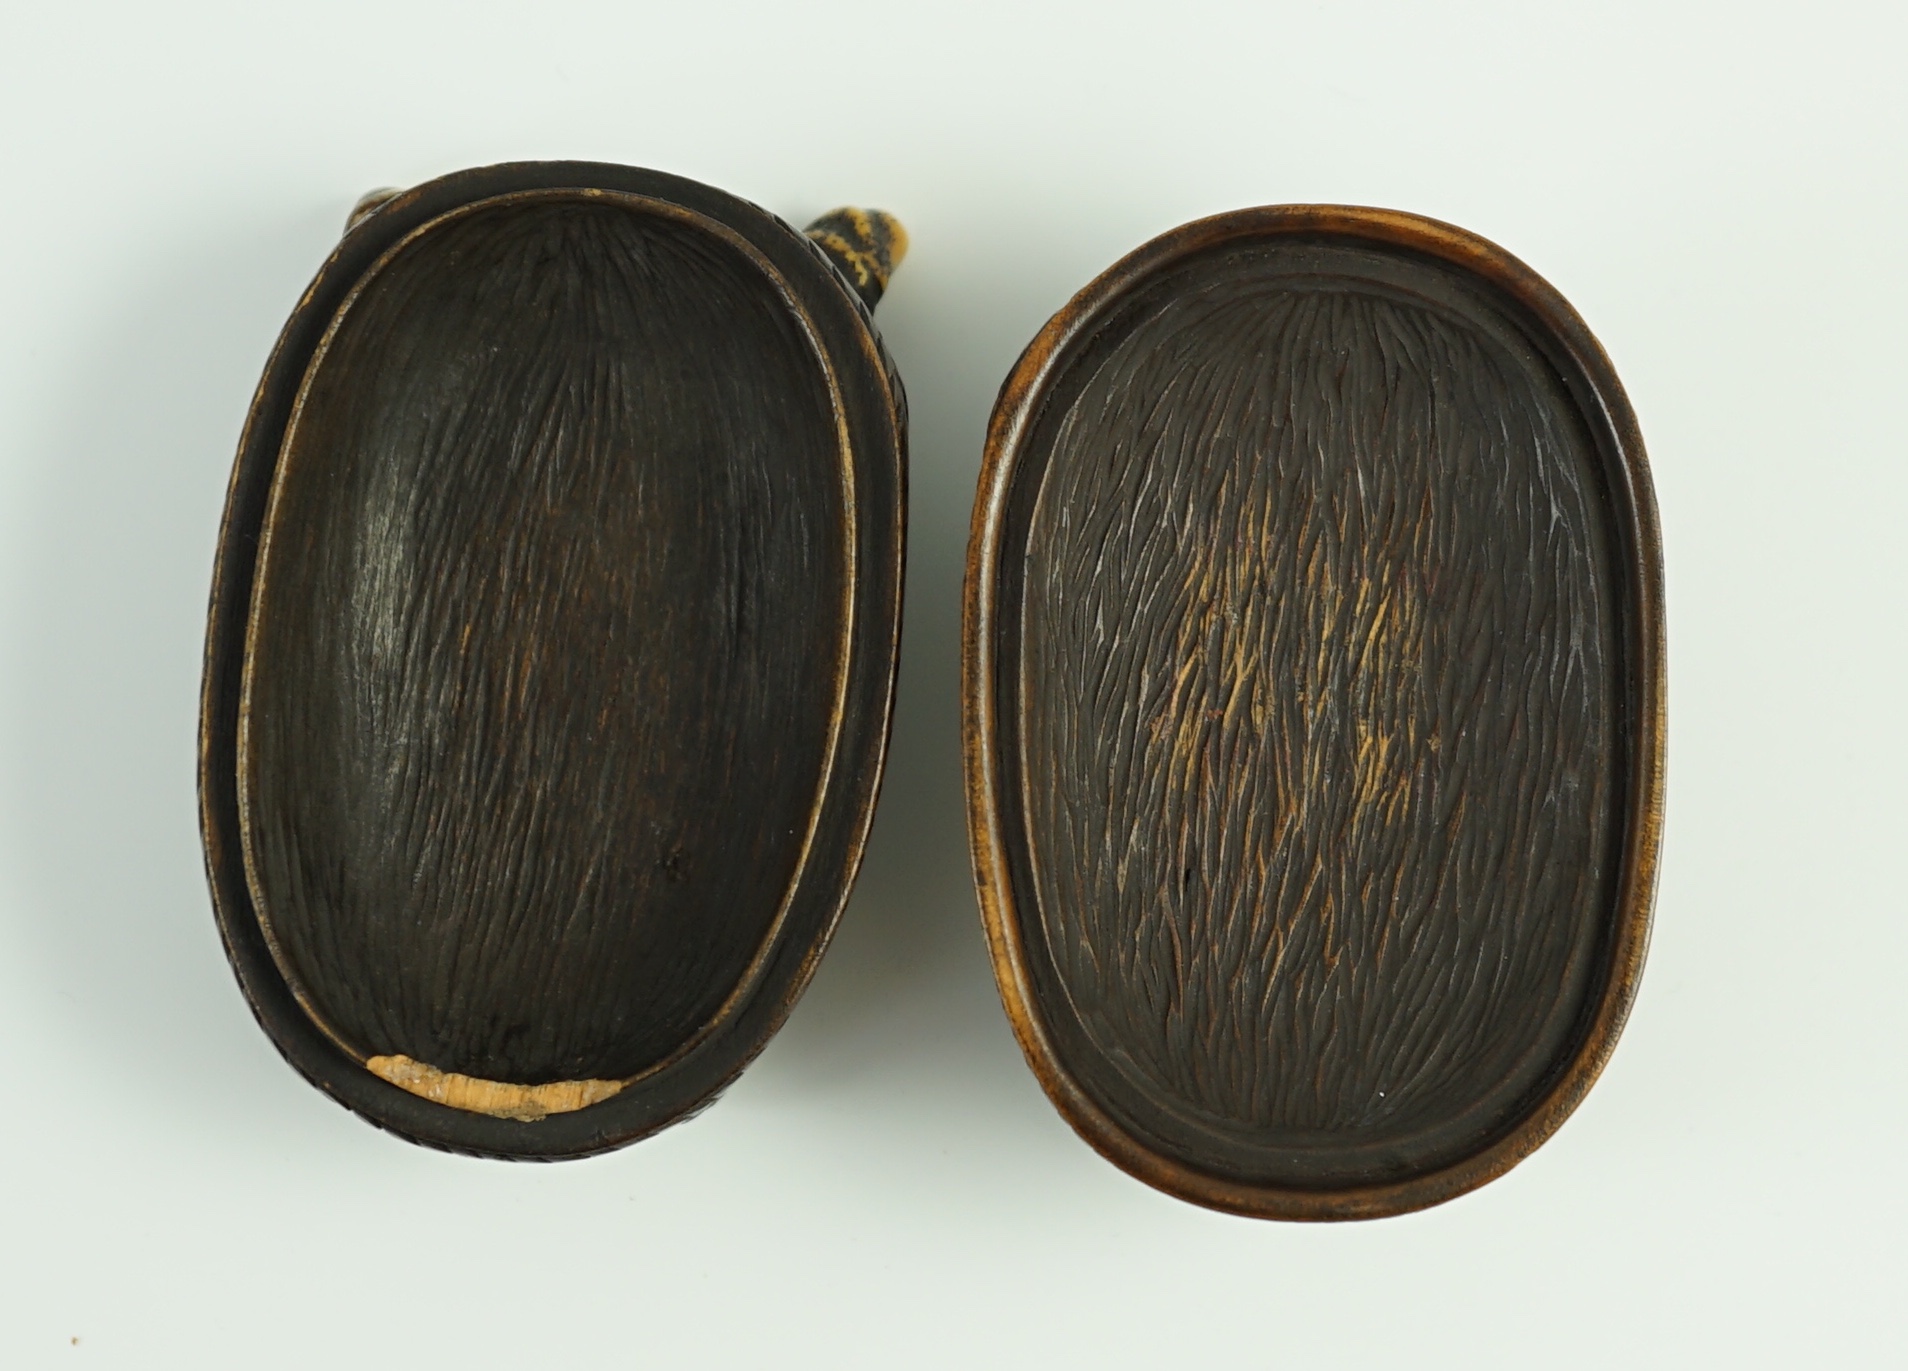 An unusual Japanese double noh mask wood container, early 20th century, 6.6 cm high, tiny losses